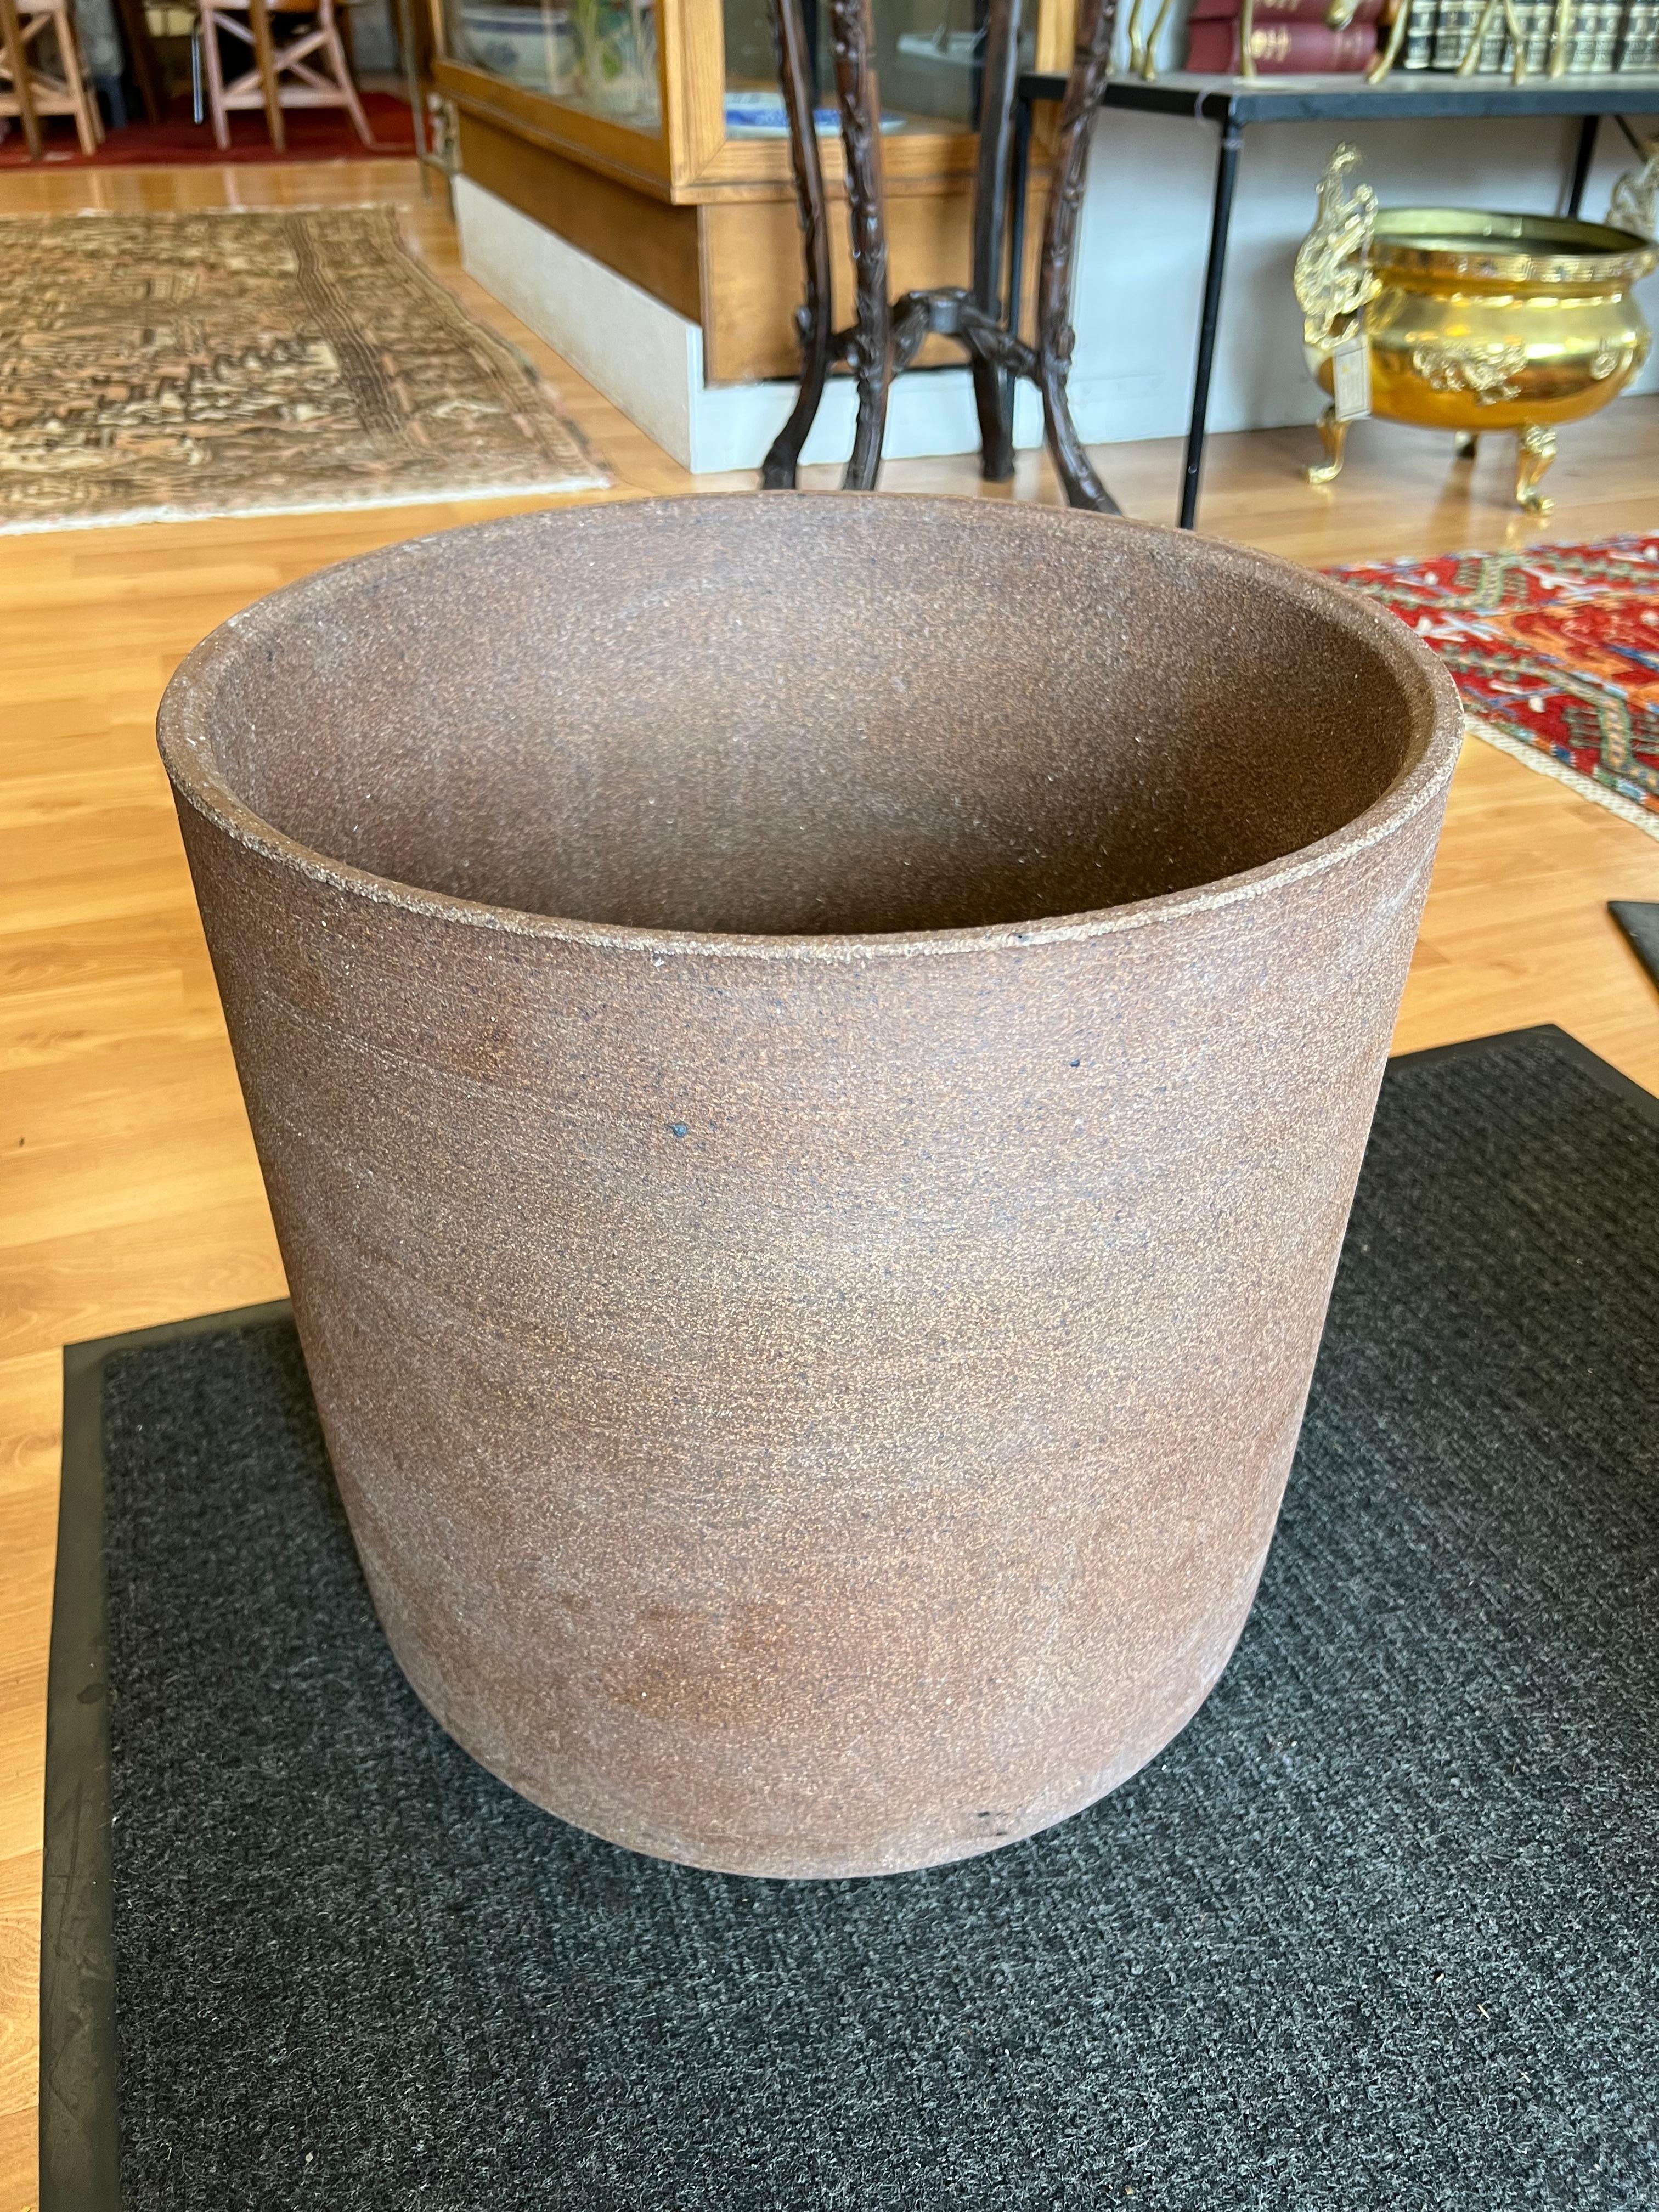 David Cressey Pro/Artisan for Architectural Pottery Large Planters, 5 Available 4